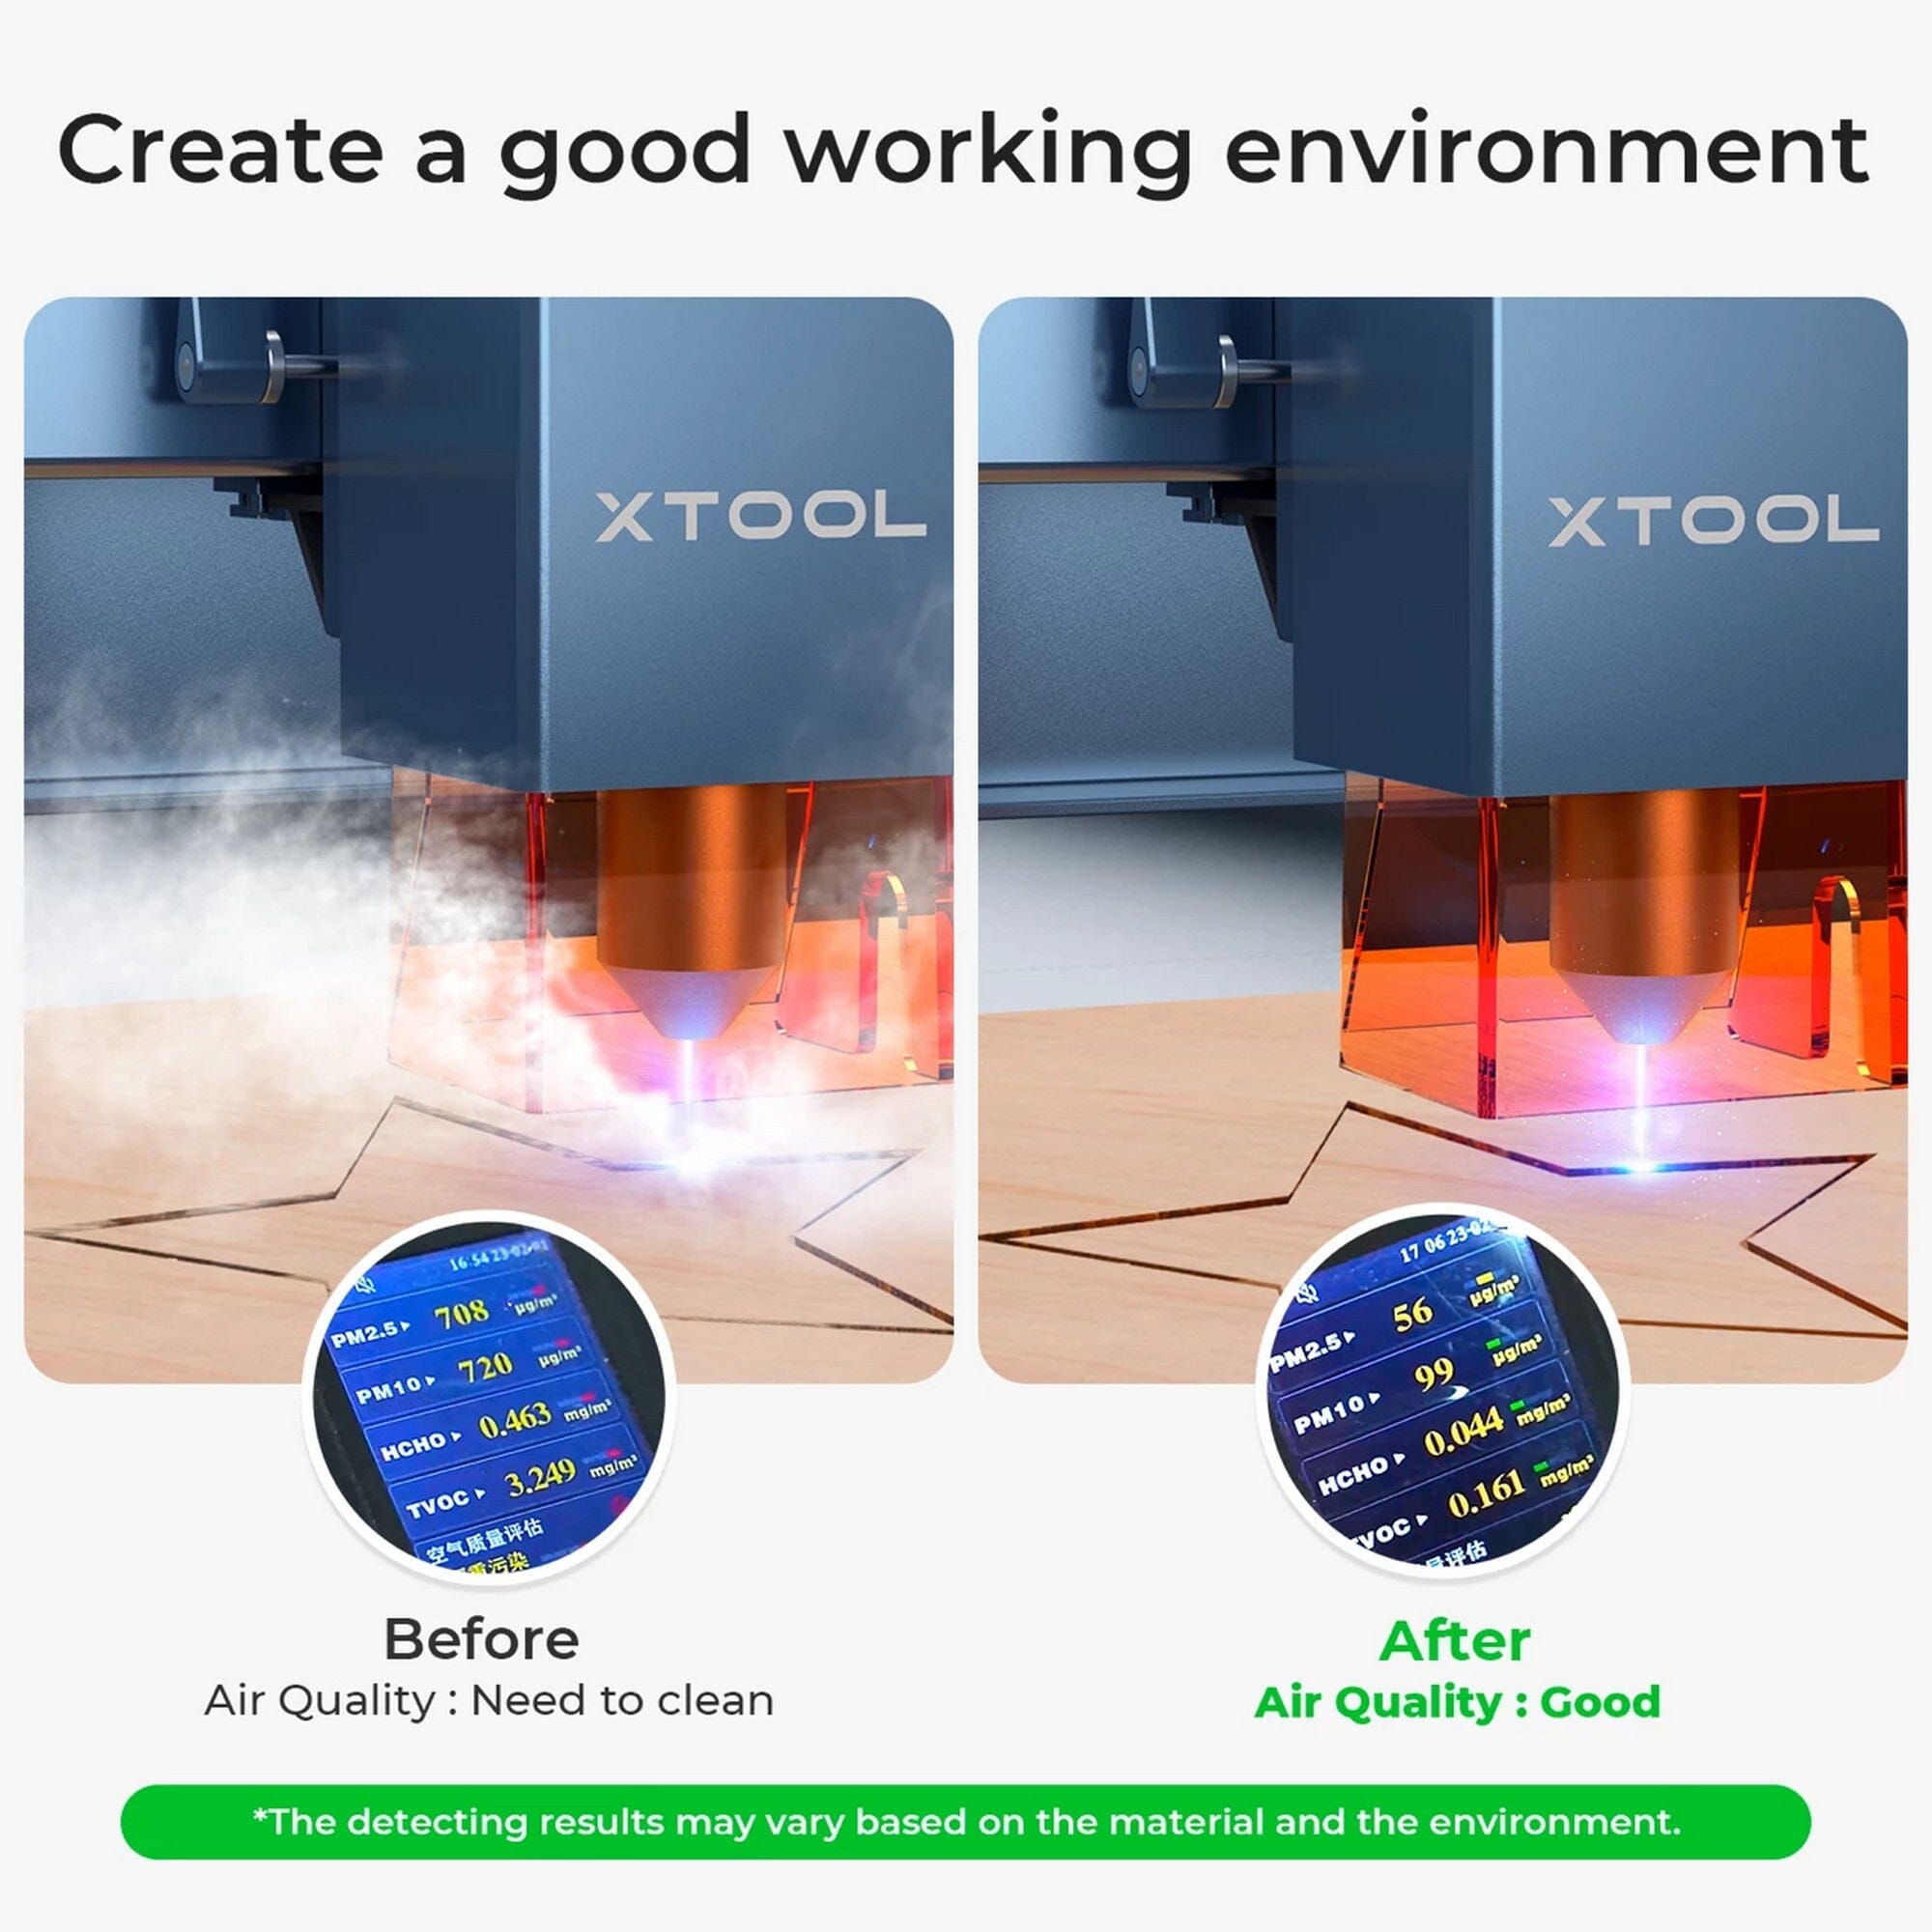 xTool Smoke & Air Purifier for xTool P2, M1, S1, D1, D1 Pro Laser Cutters